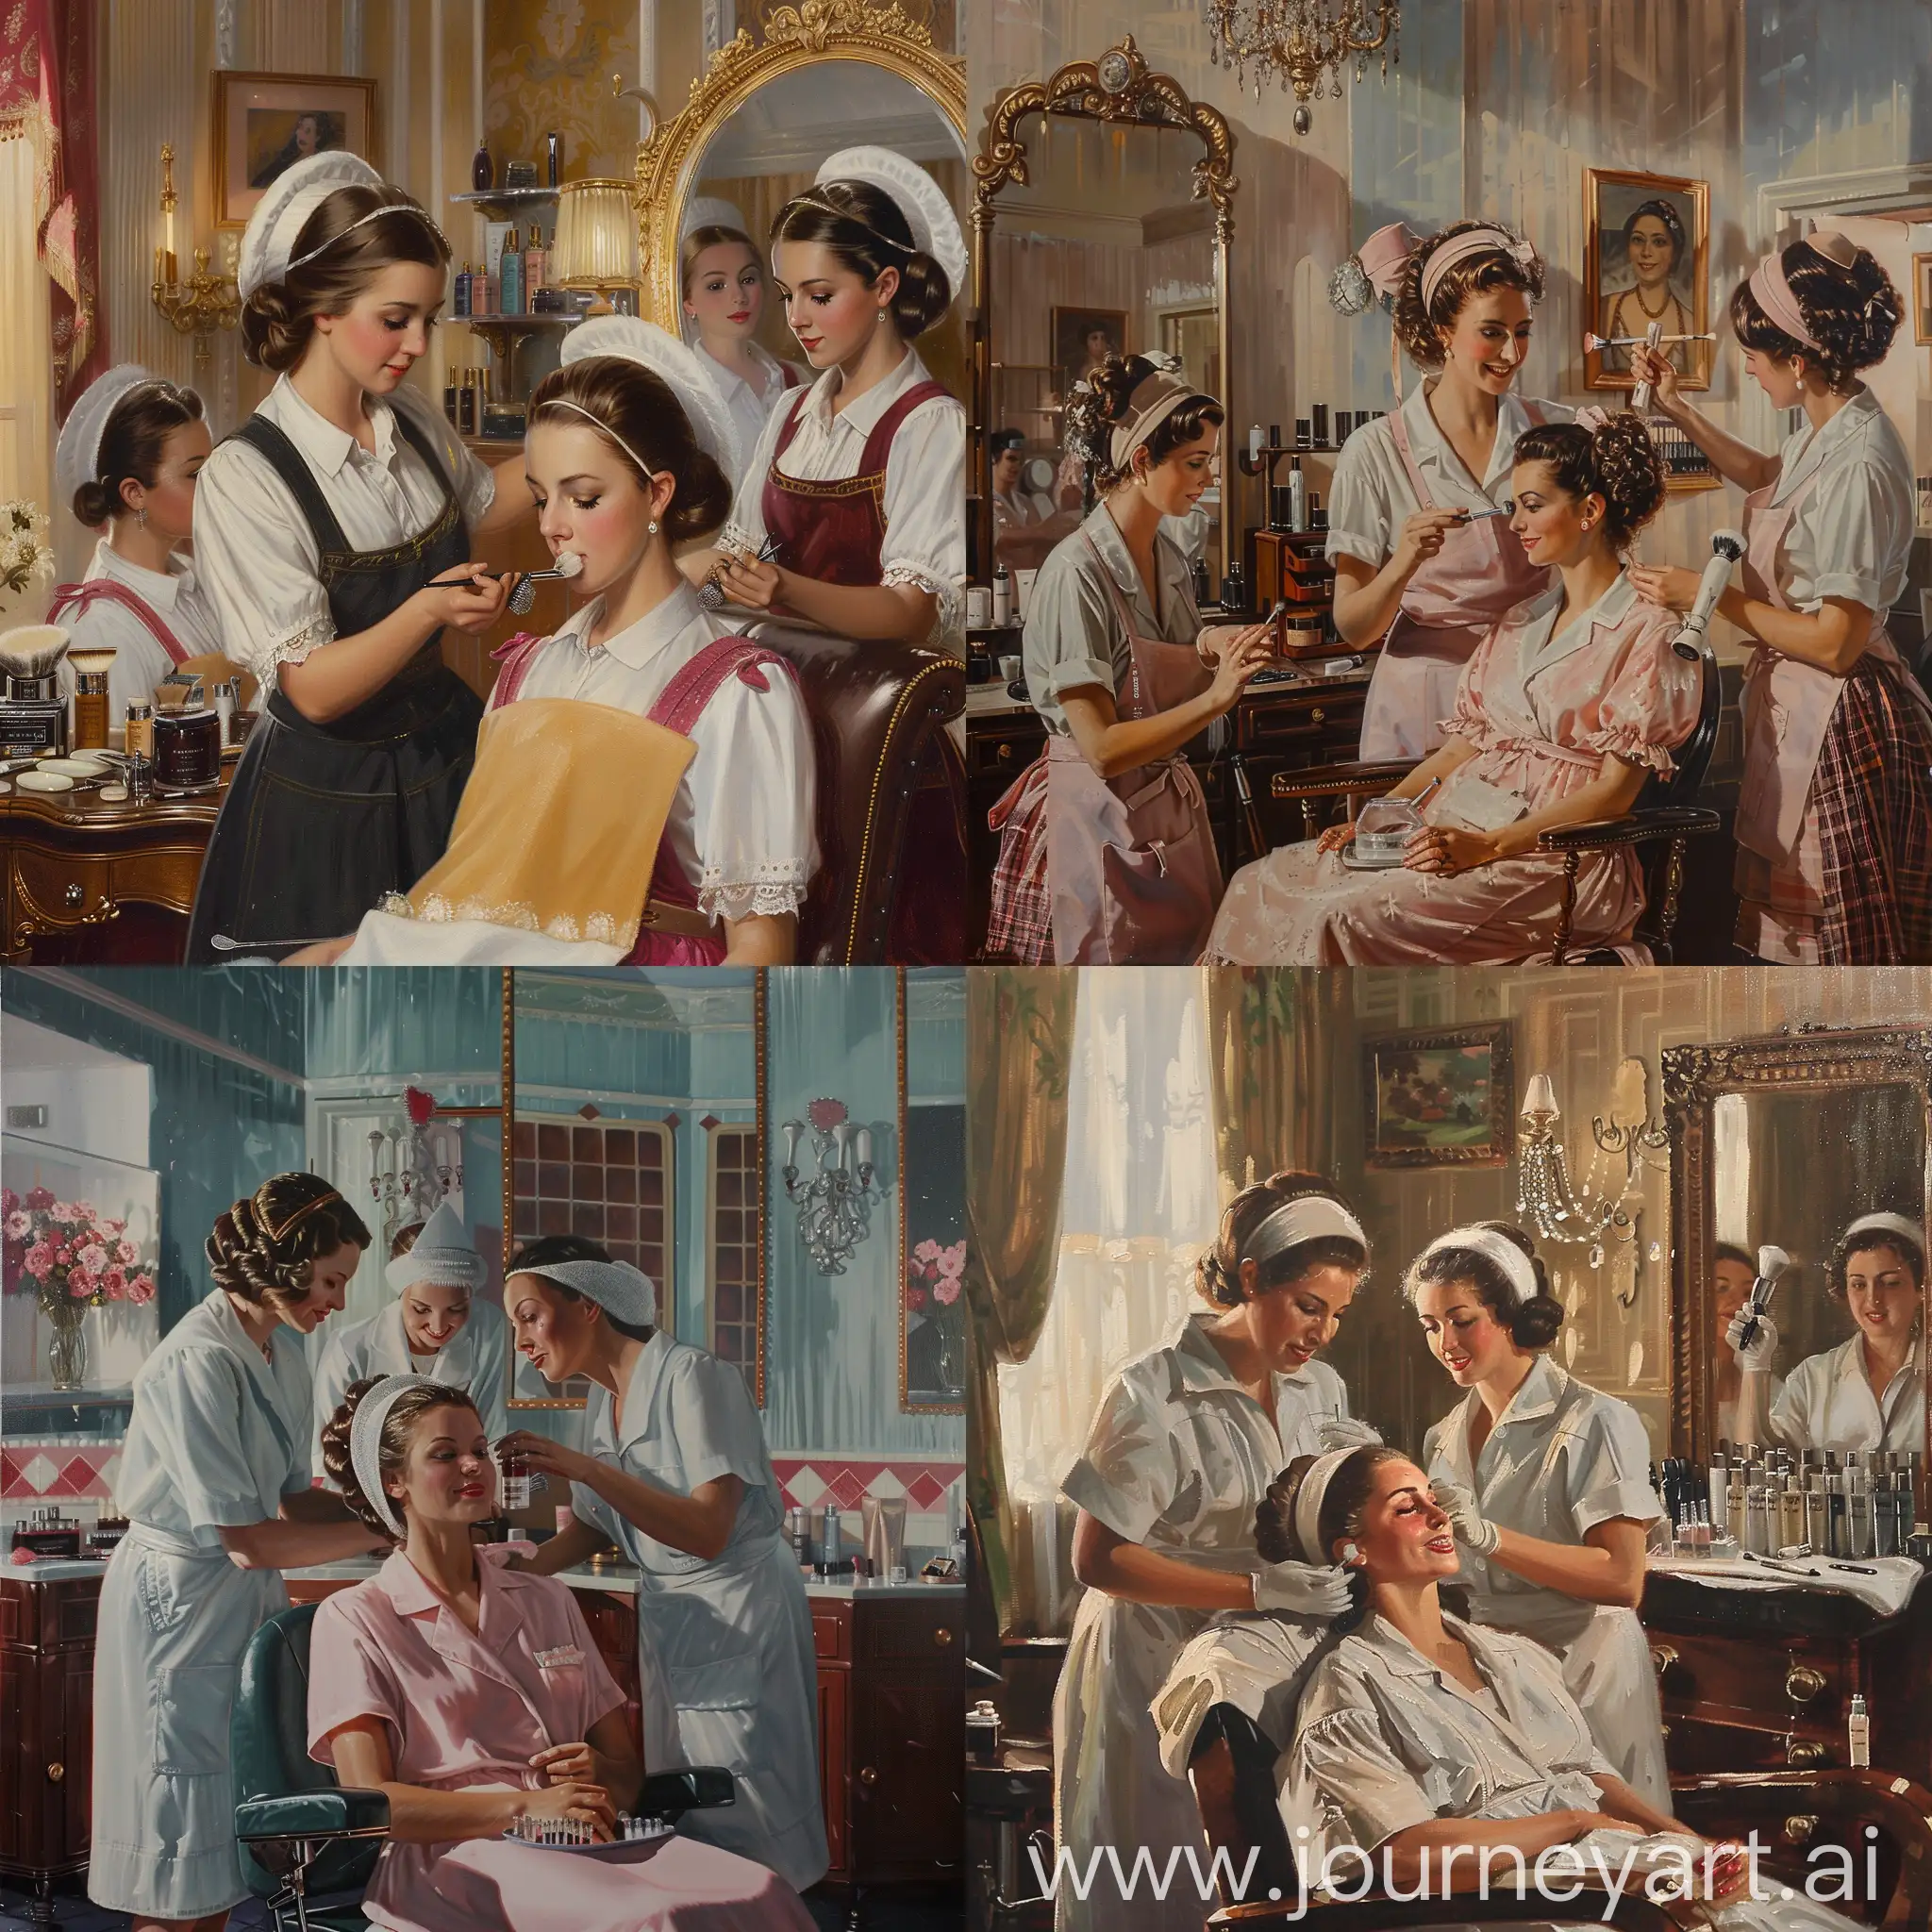 Luxurious-Scene-Maids-Serving-the-Worlds-Richest-Woman-in-a-Beauty-Salon